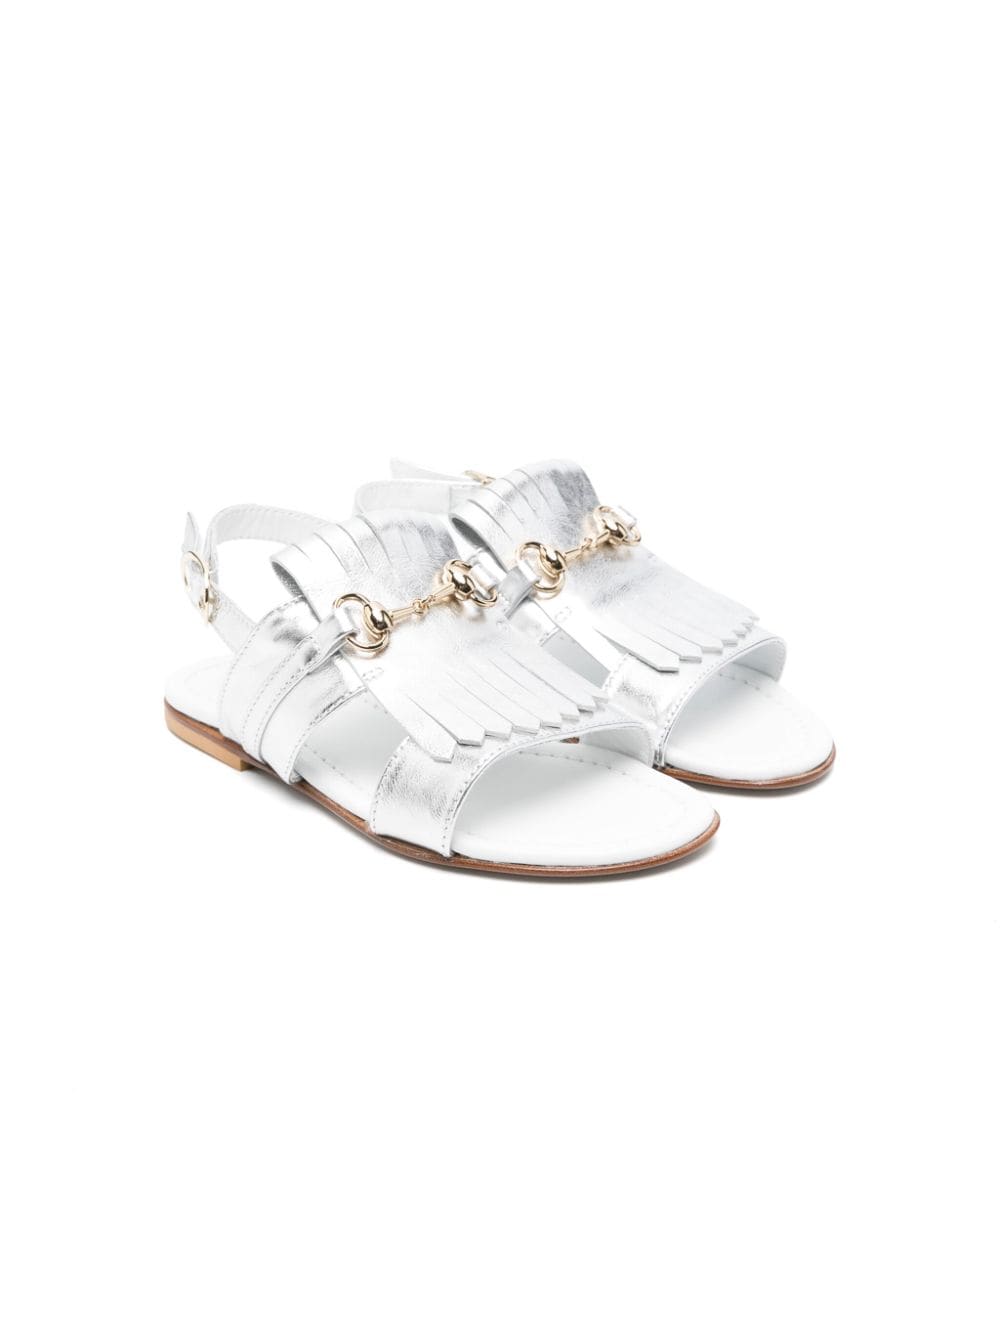 MONTELPARE TRADITION fringed leather sandals - Silver von MONTELPARE TRADITION